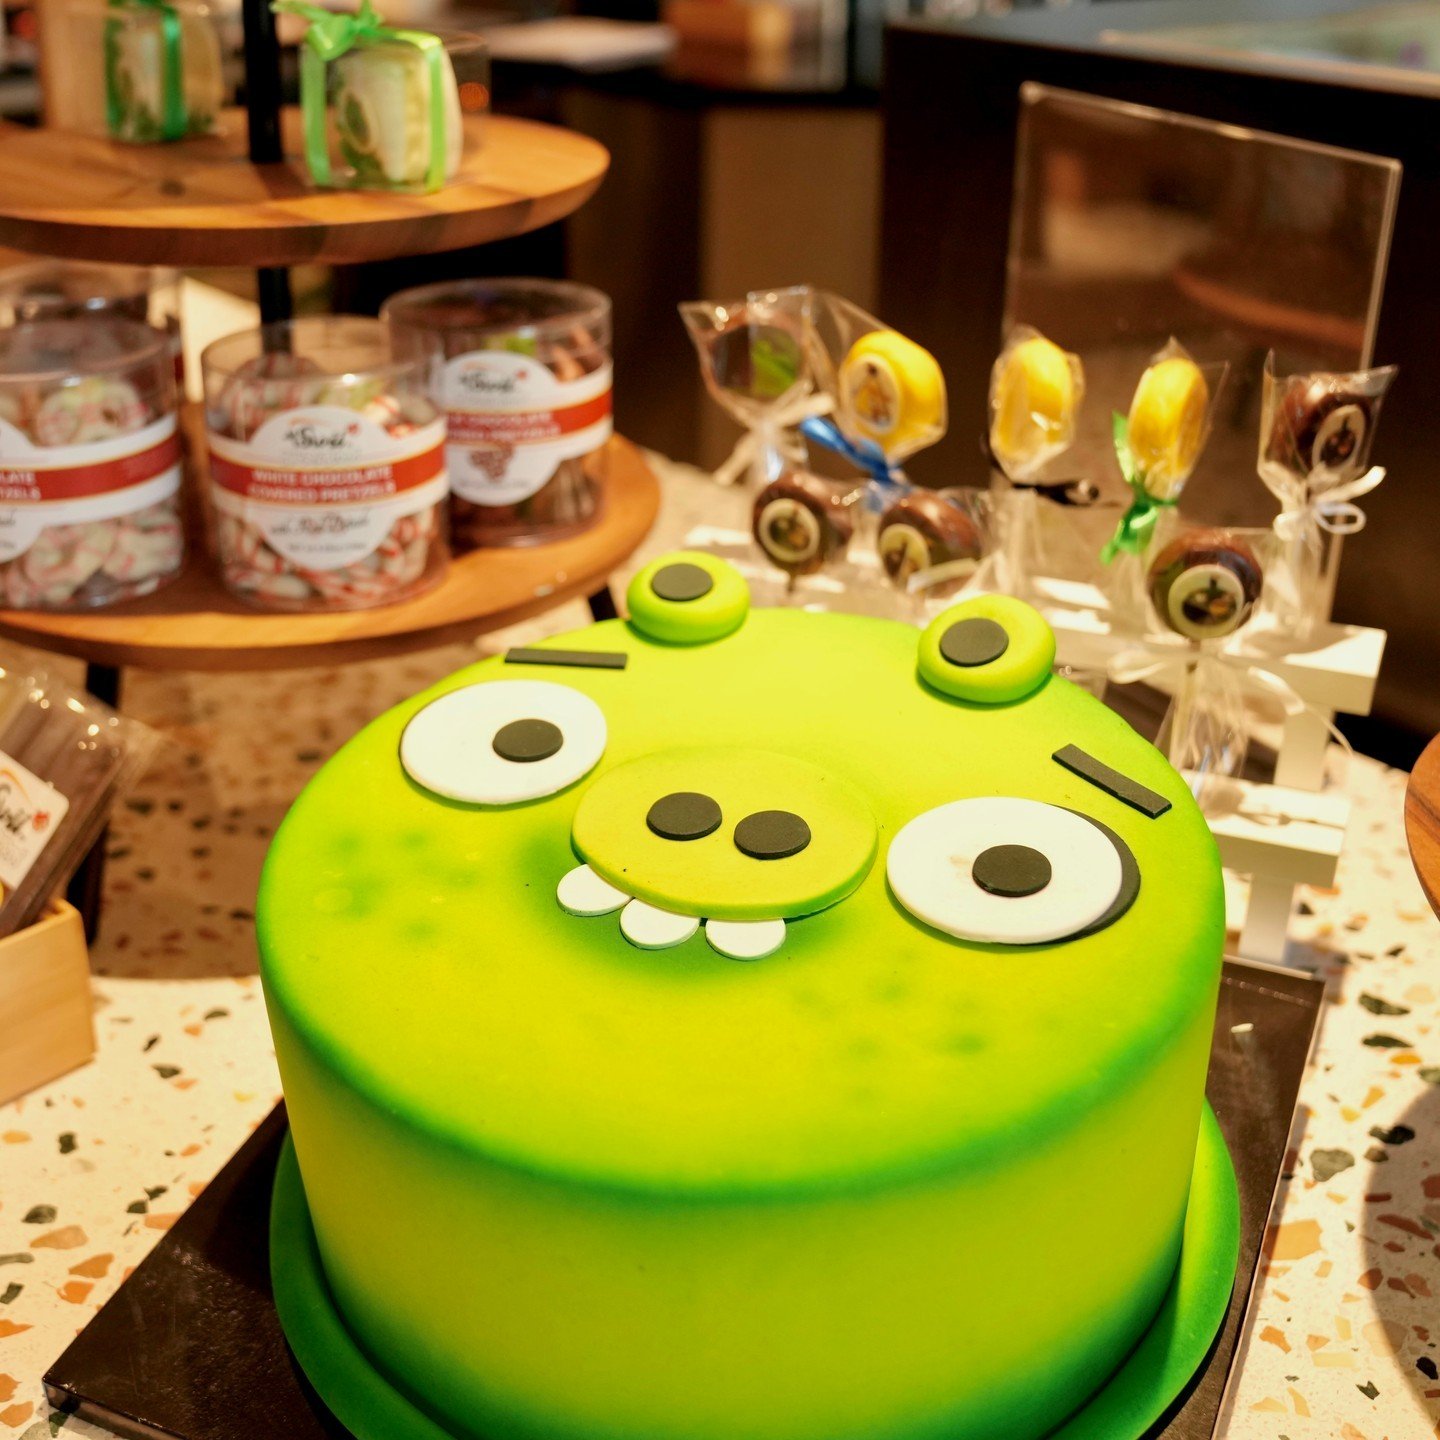 Who can resist a Bad Piggies cake? 💚🐽 Order your customizable cake 🎂, perfect for birthdays and large parties! 🥳

💌 DM or call us for more details!

#iswiibyangrybirds #angrybirds #angrybirdsretailcafe #retailcafe #sweets #desserts #flushing #qu